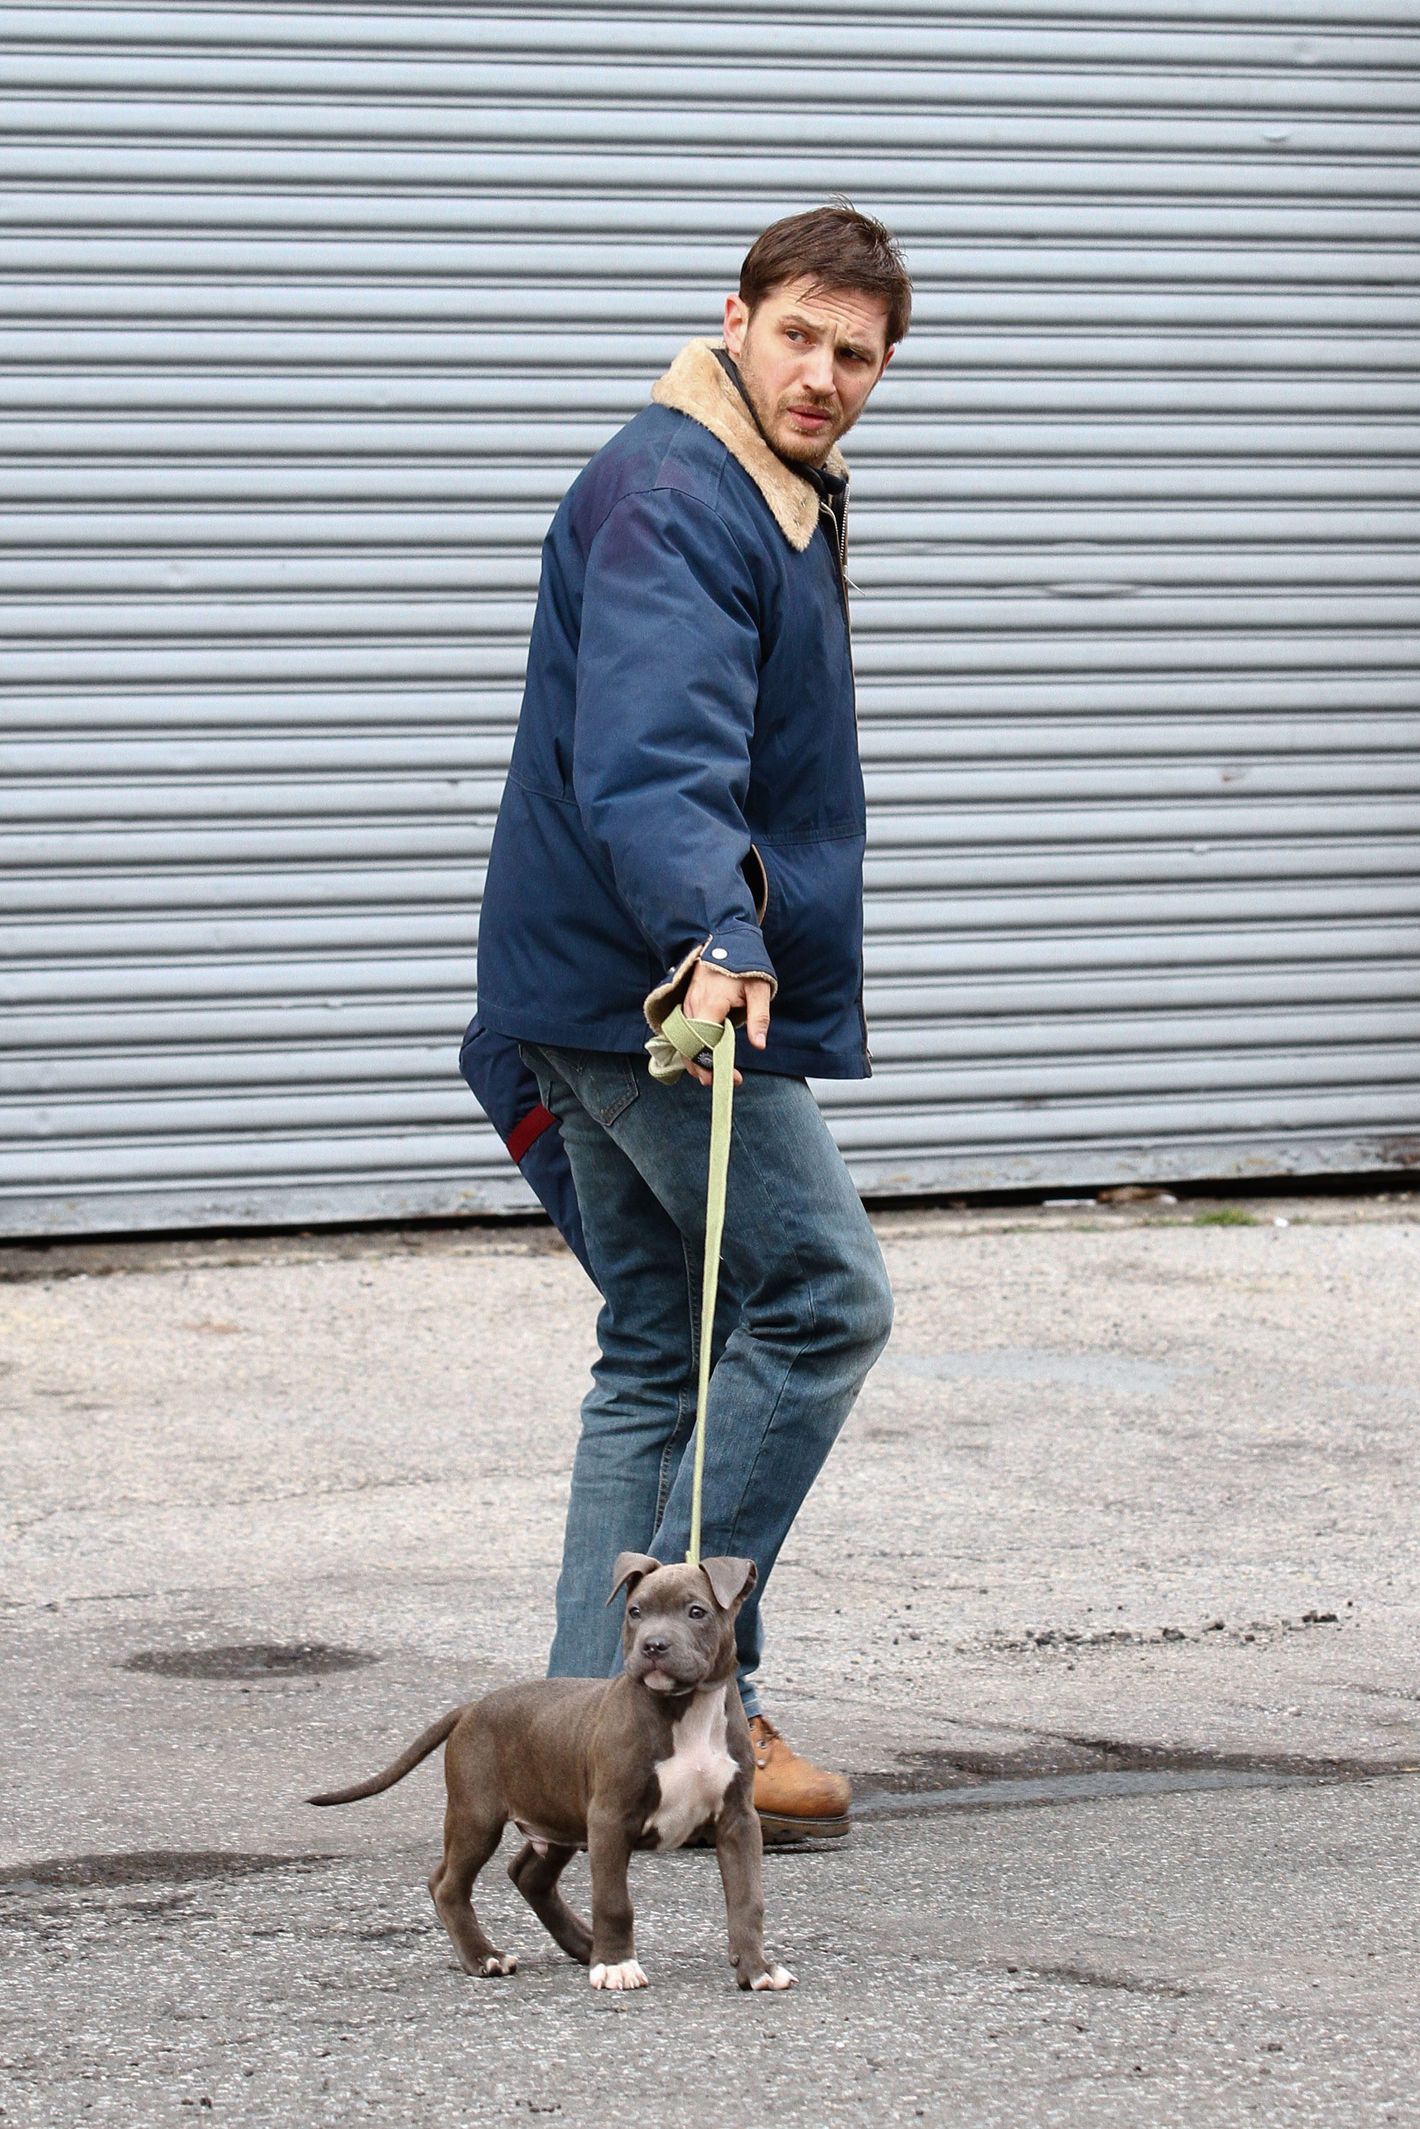 How to Hug a Puppy, by Tom Hardy